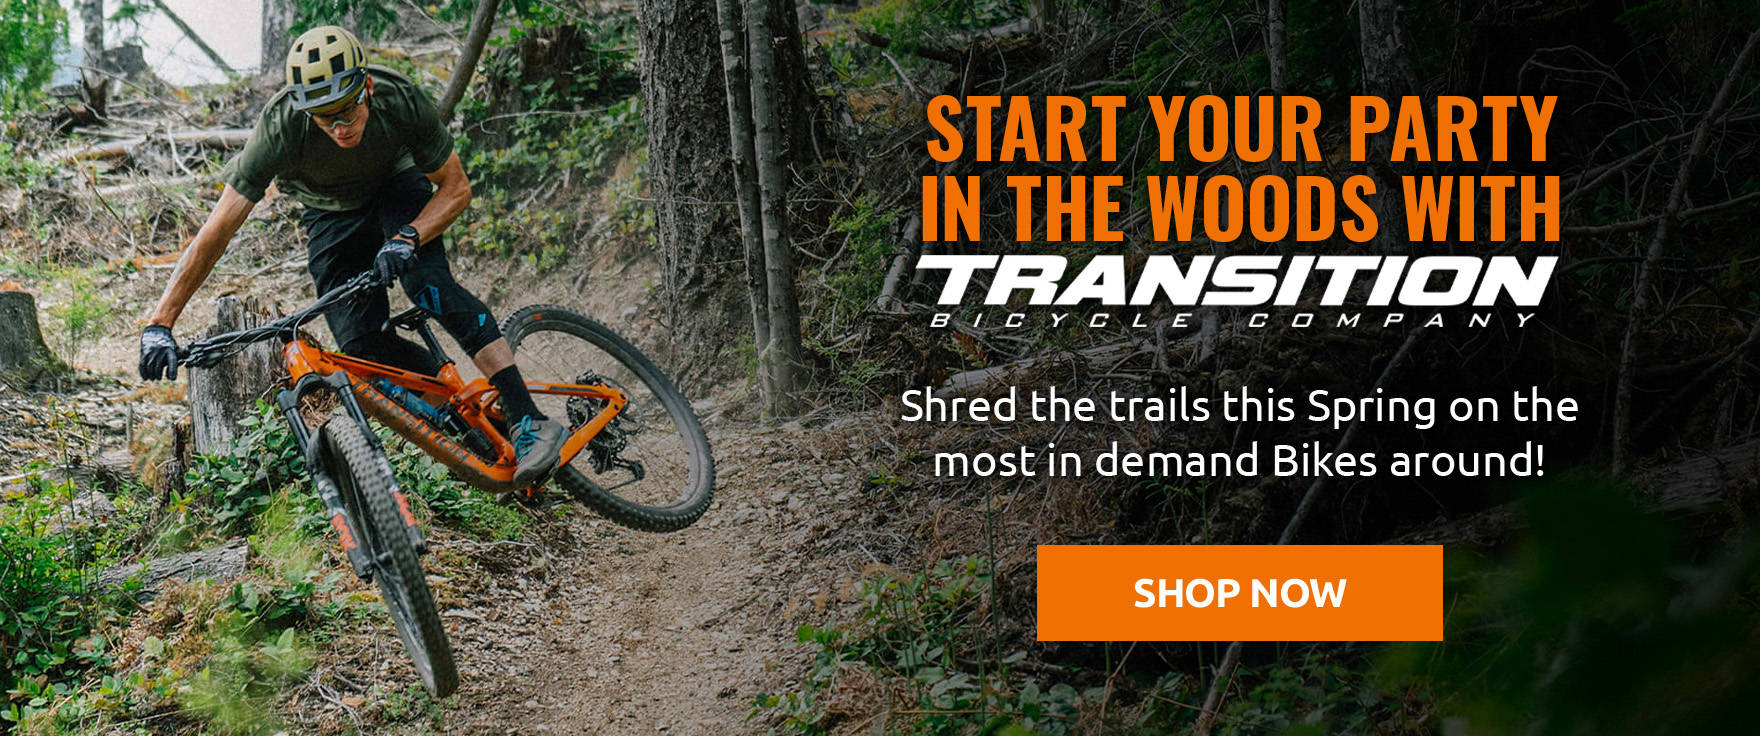 Start your party in the woods with Transition Bikes!